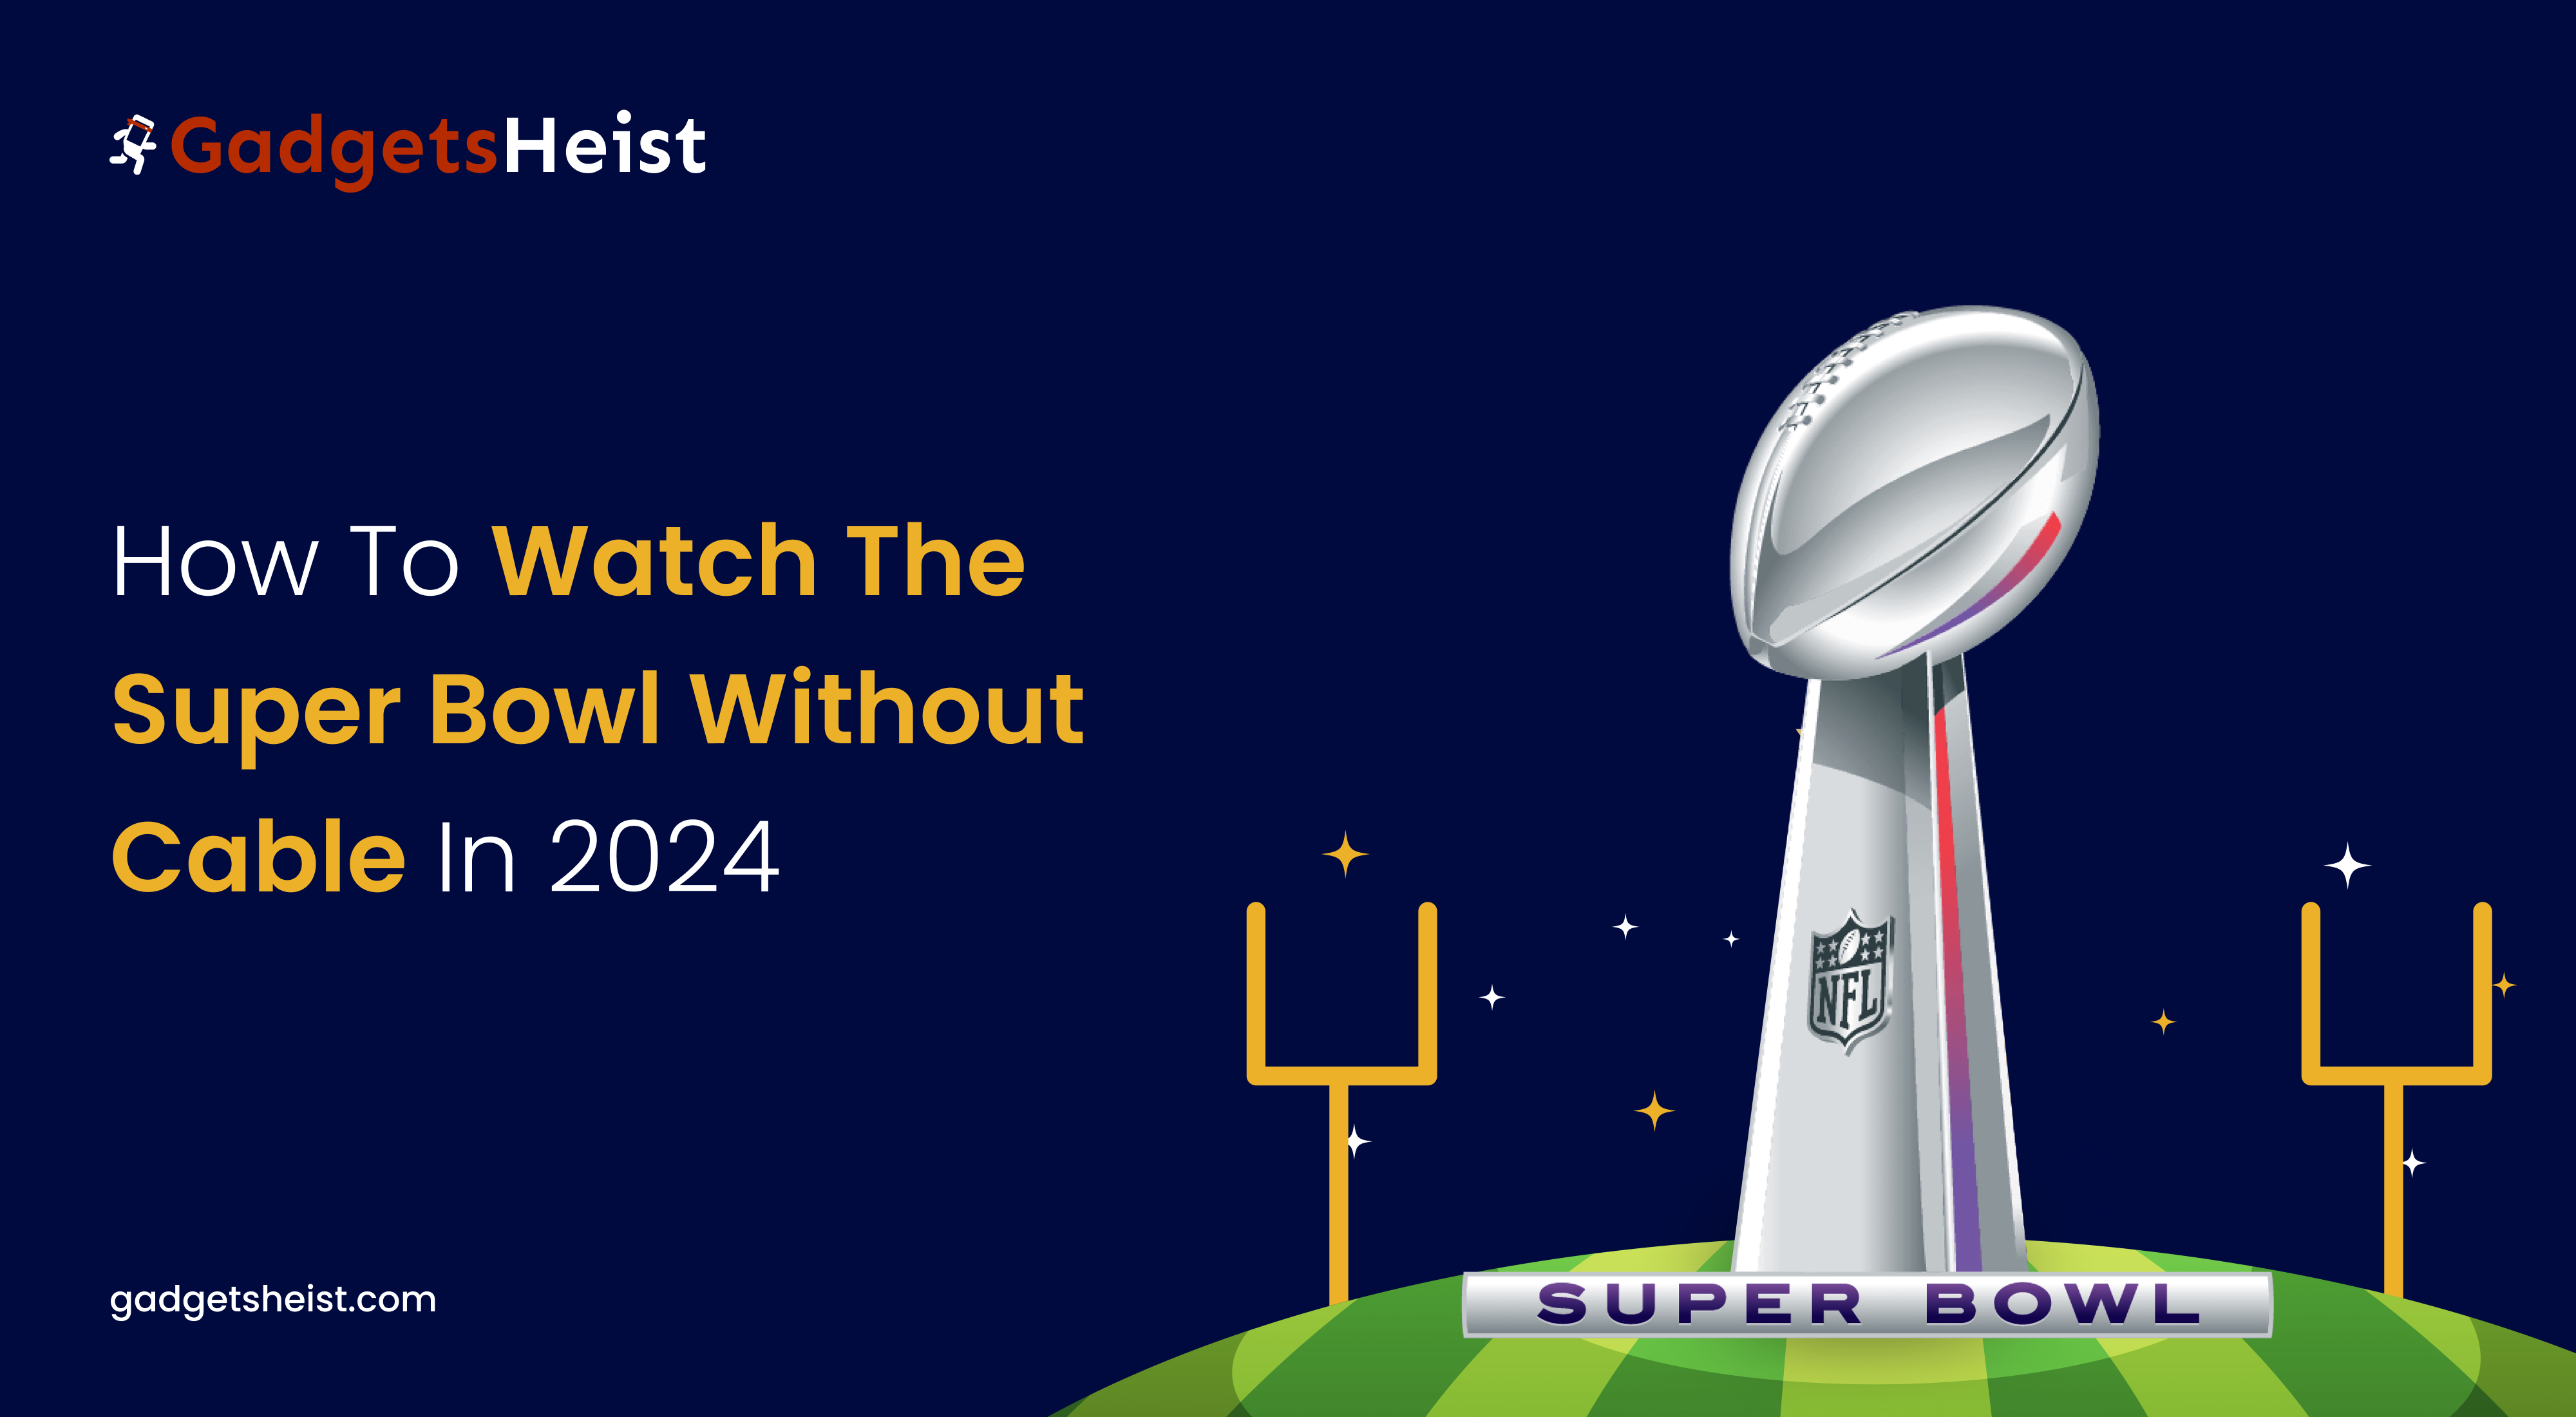 How to watch the Super Bowl without cable in 2024